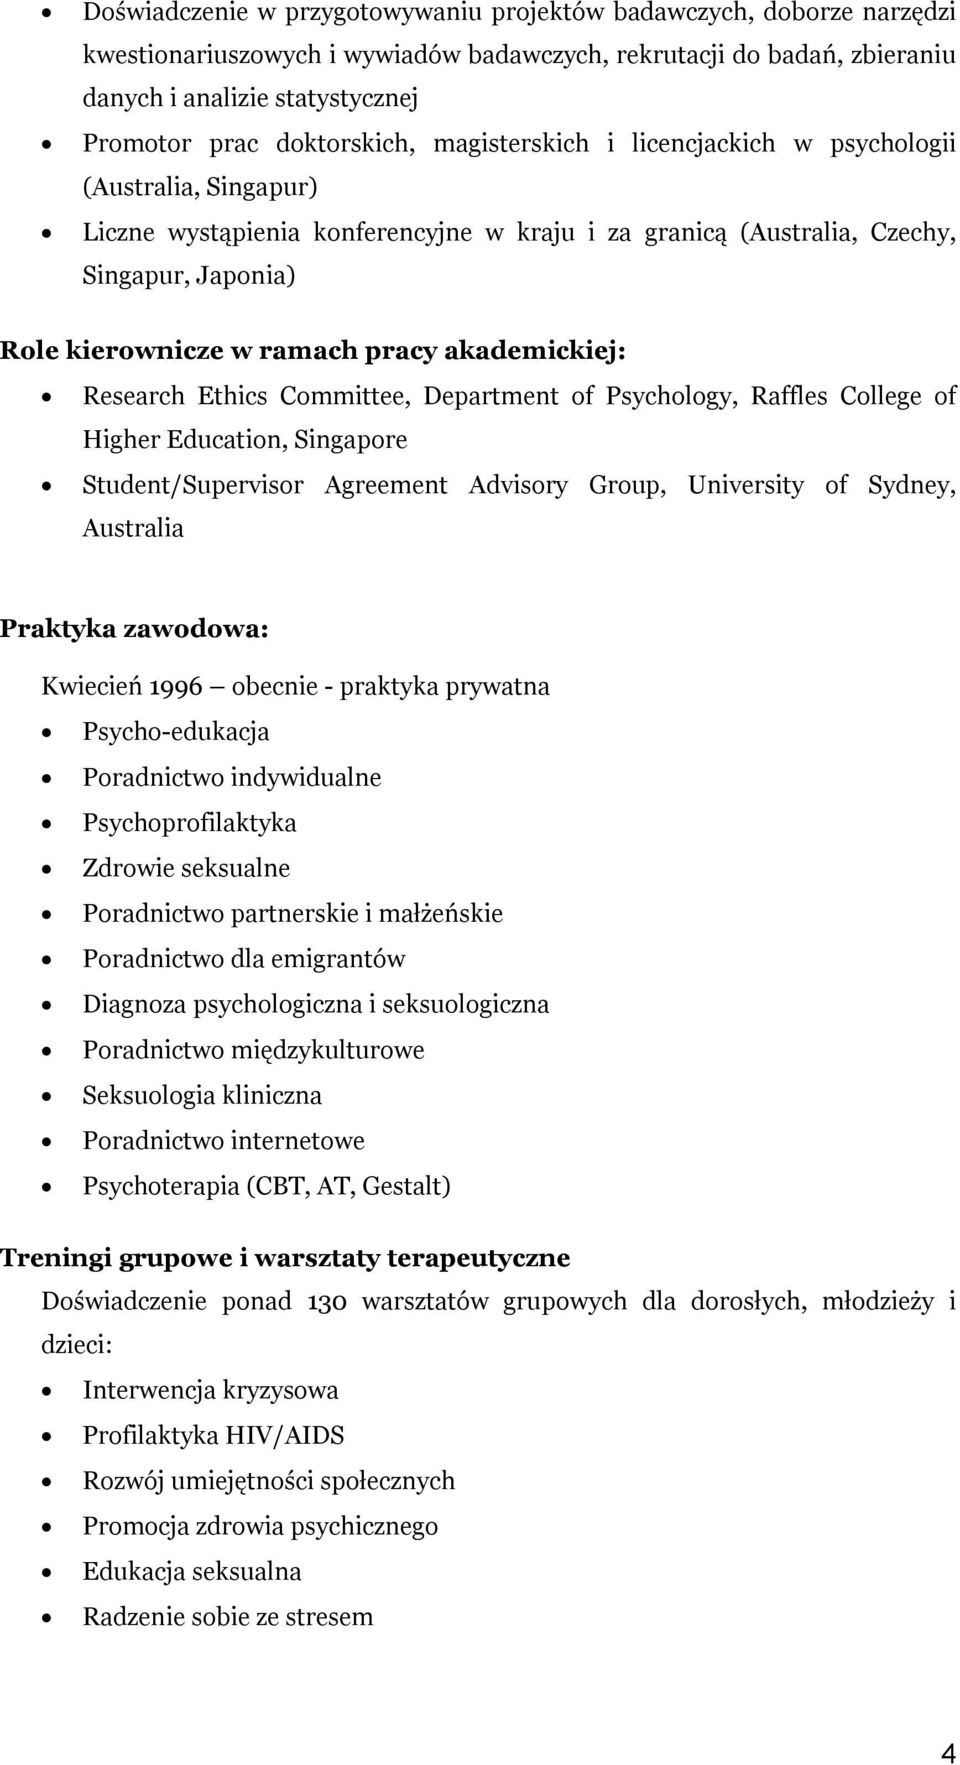 pracy akademickiej: Research Ethics Committee, Department of Psychology, Raffles College of Higher Education, Singapore Student/Supervisor Agreement Advisory Group, University of Sydney, Australia